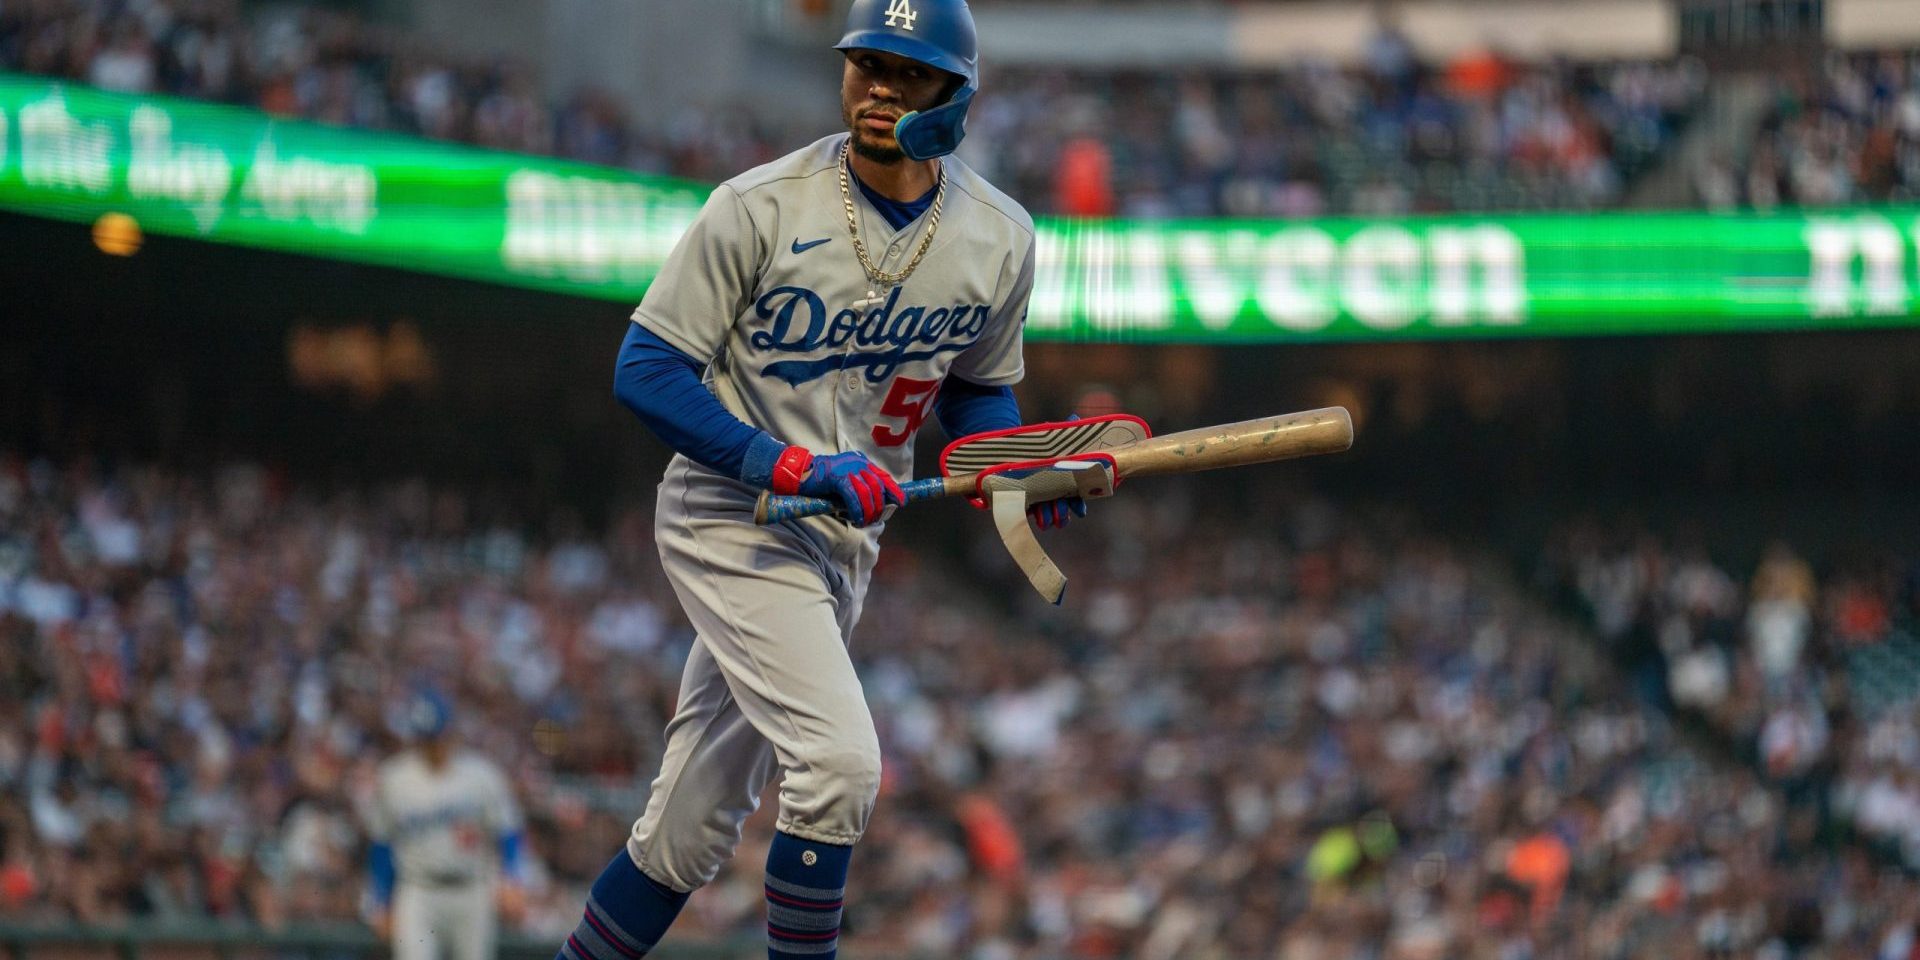 Sep 30, 2023; San Francisco, California, USA; Los Angeles Dodgers right fielder Mookie Betts (50) takes a walk during the third inning against the San Francisco Giants at Oracle Park. Mandatory Credit: Neville E. Guard-USA TODAY Sports